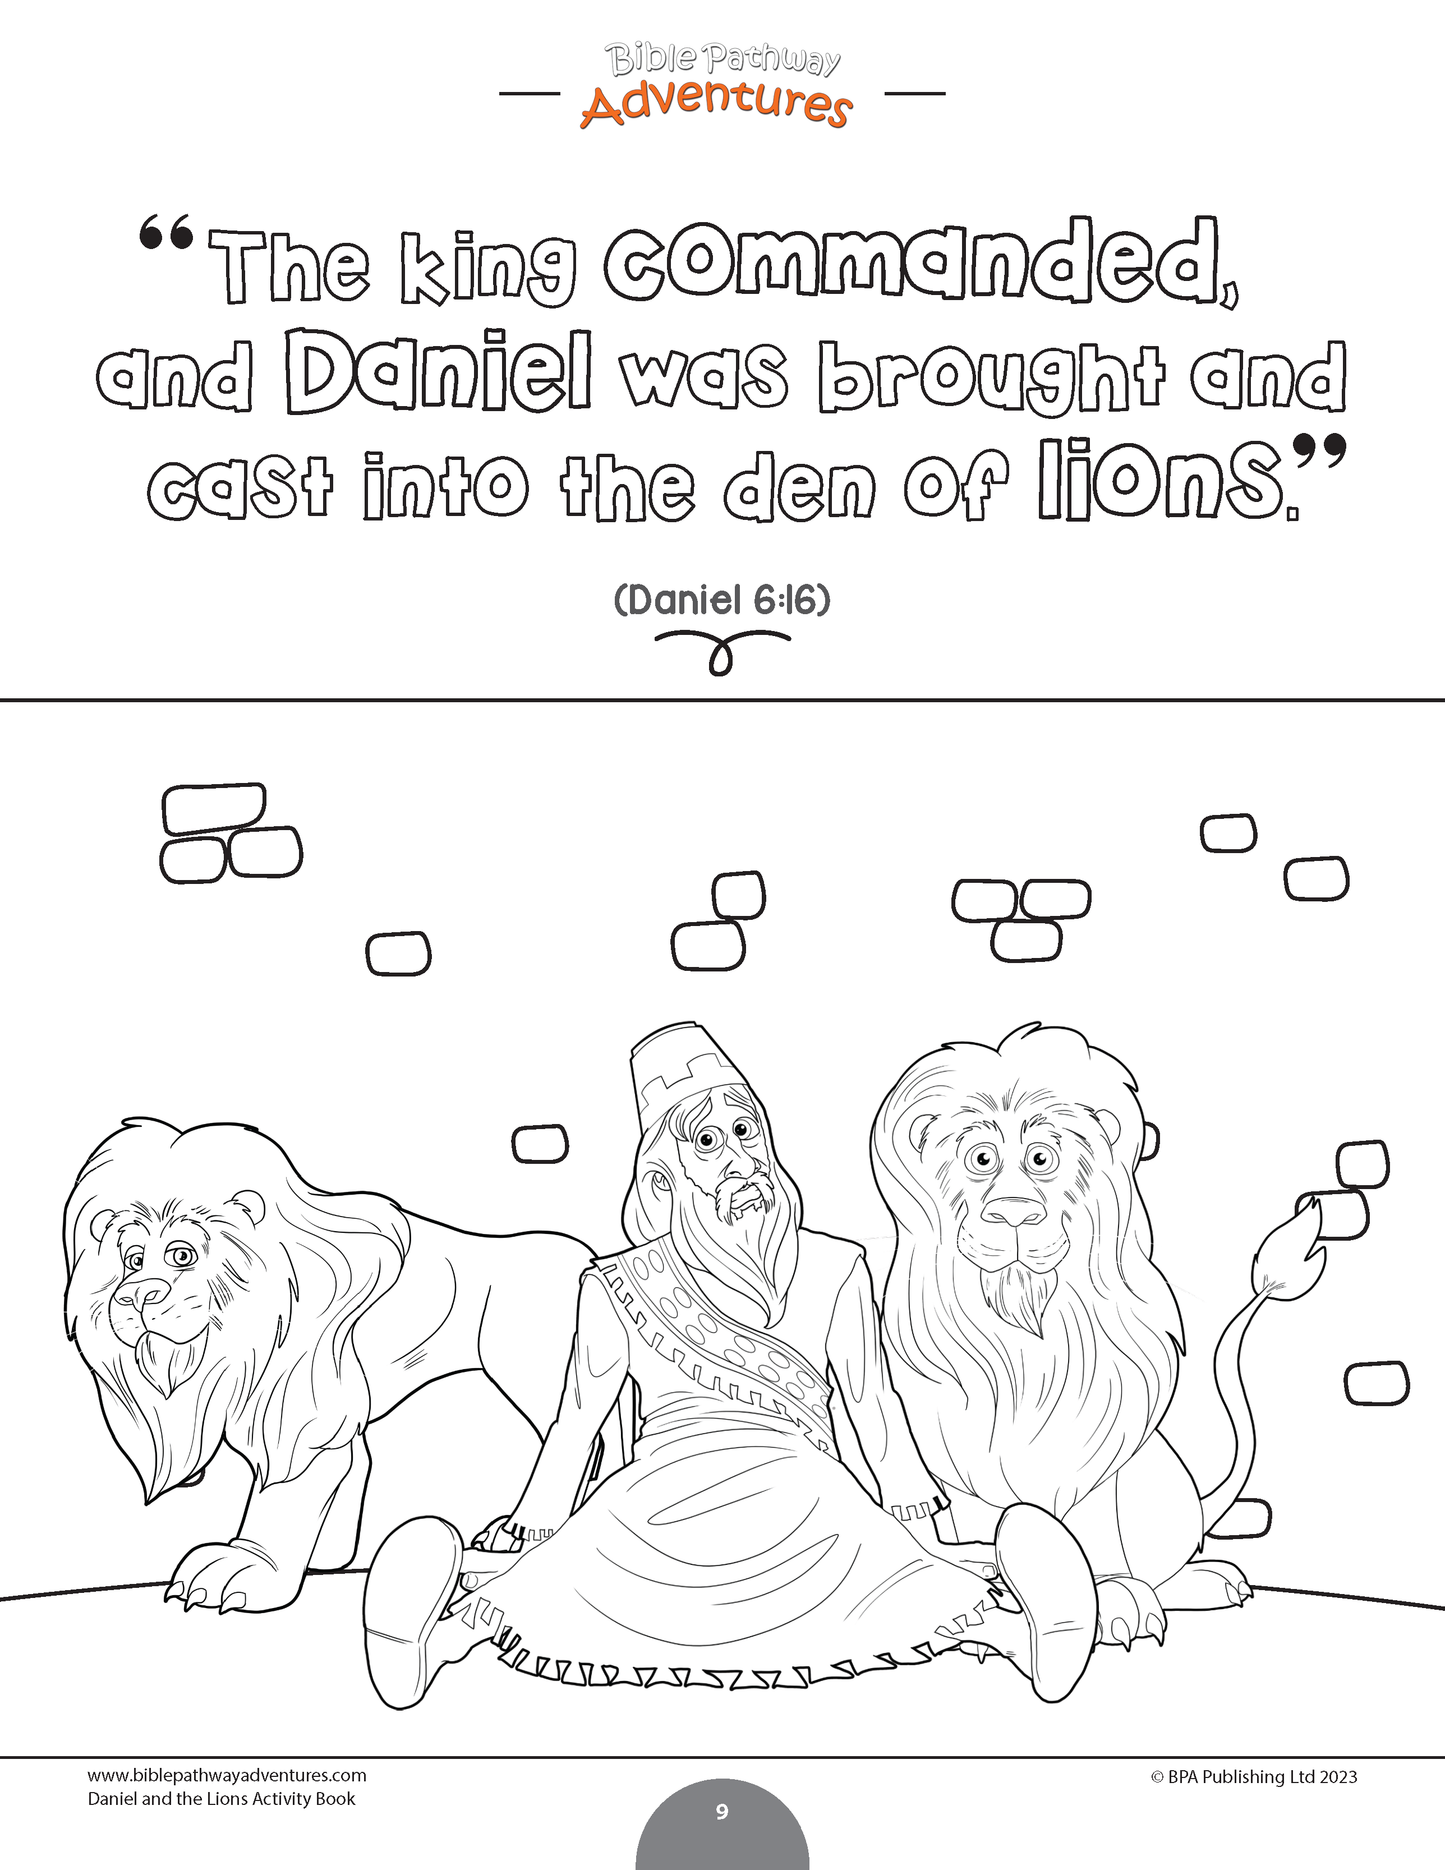 Daniel and the Lions Activity Book (PDF)